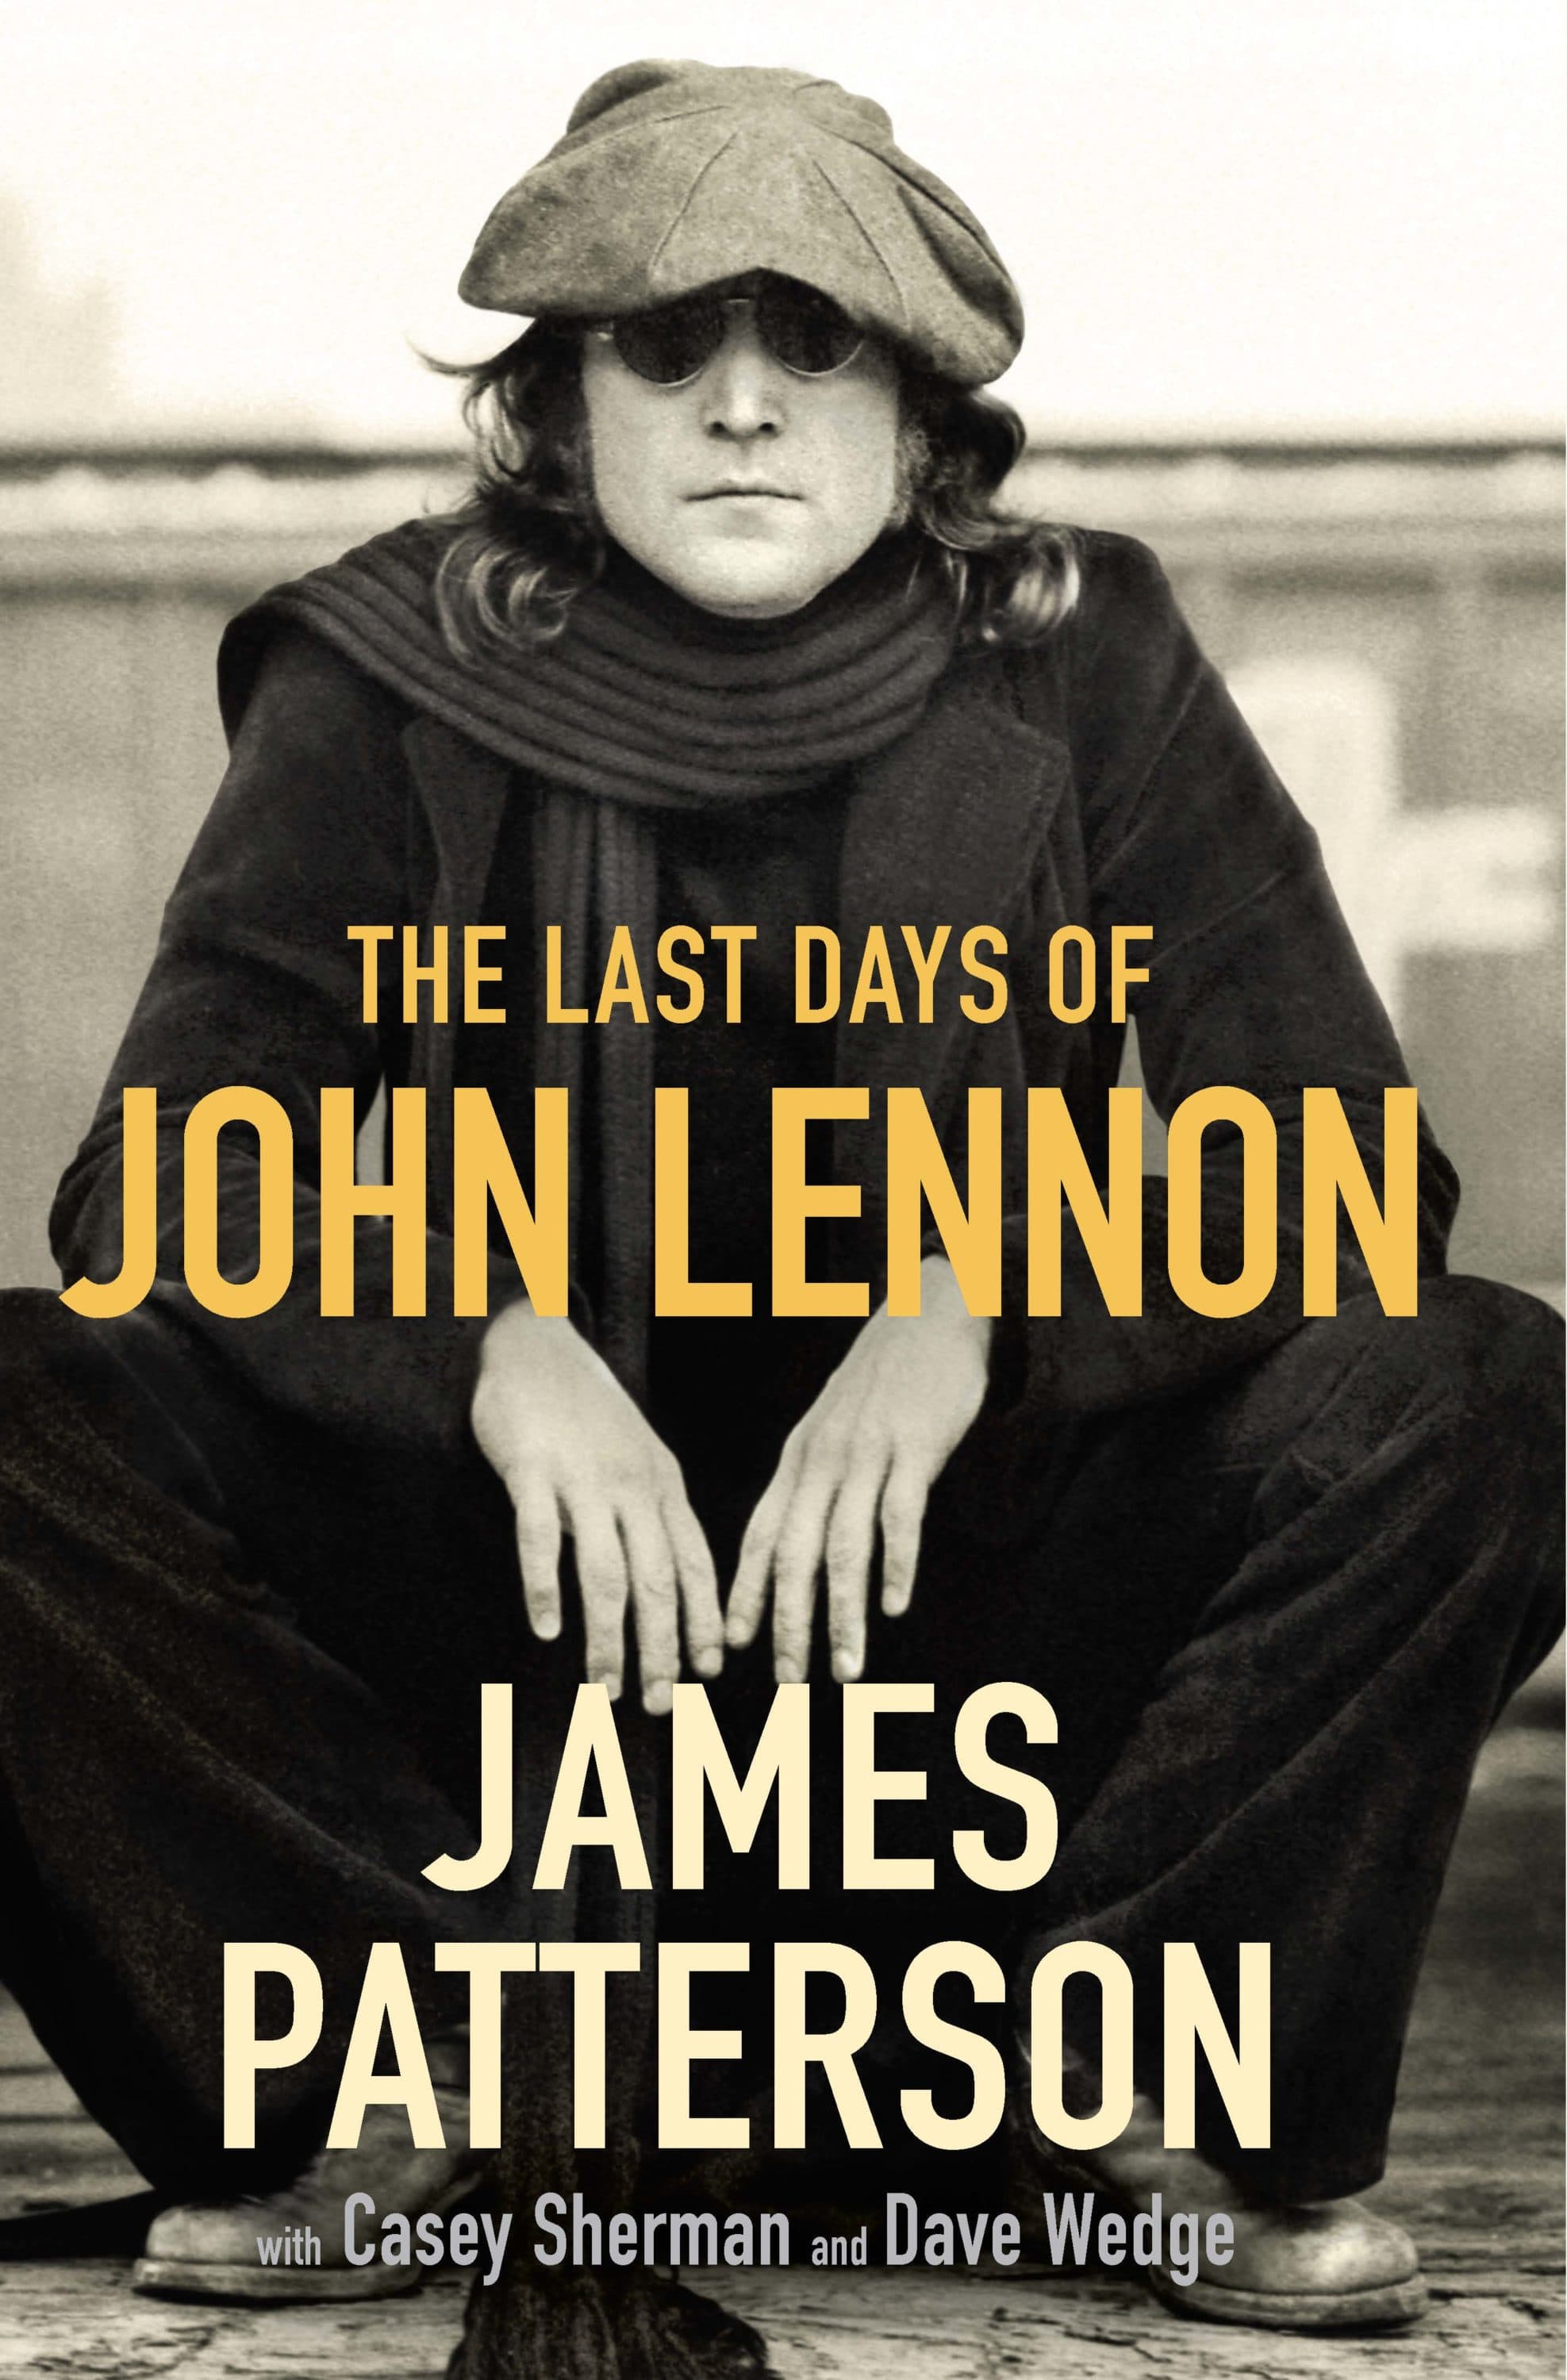 Author James Patterson Explores 'The Last Days Of John Lennon' 40 Years